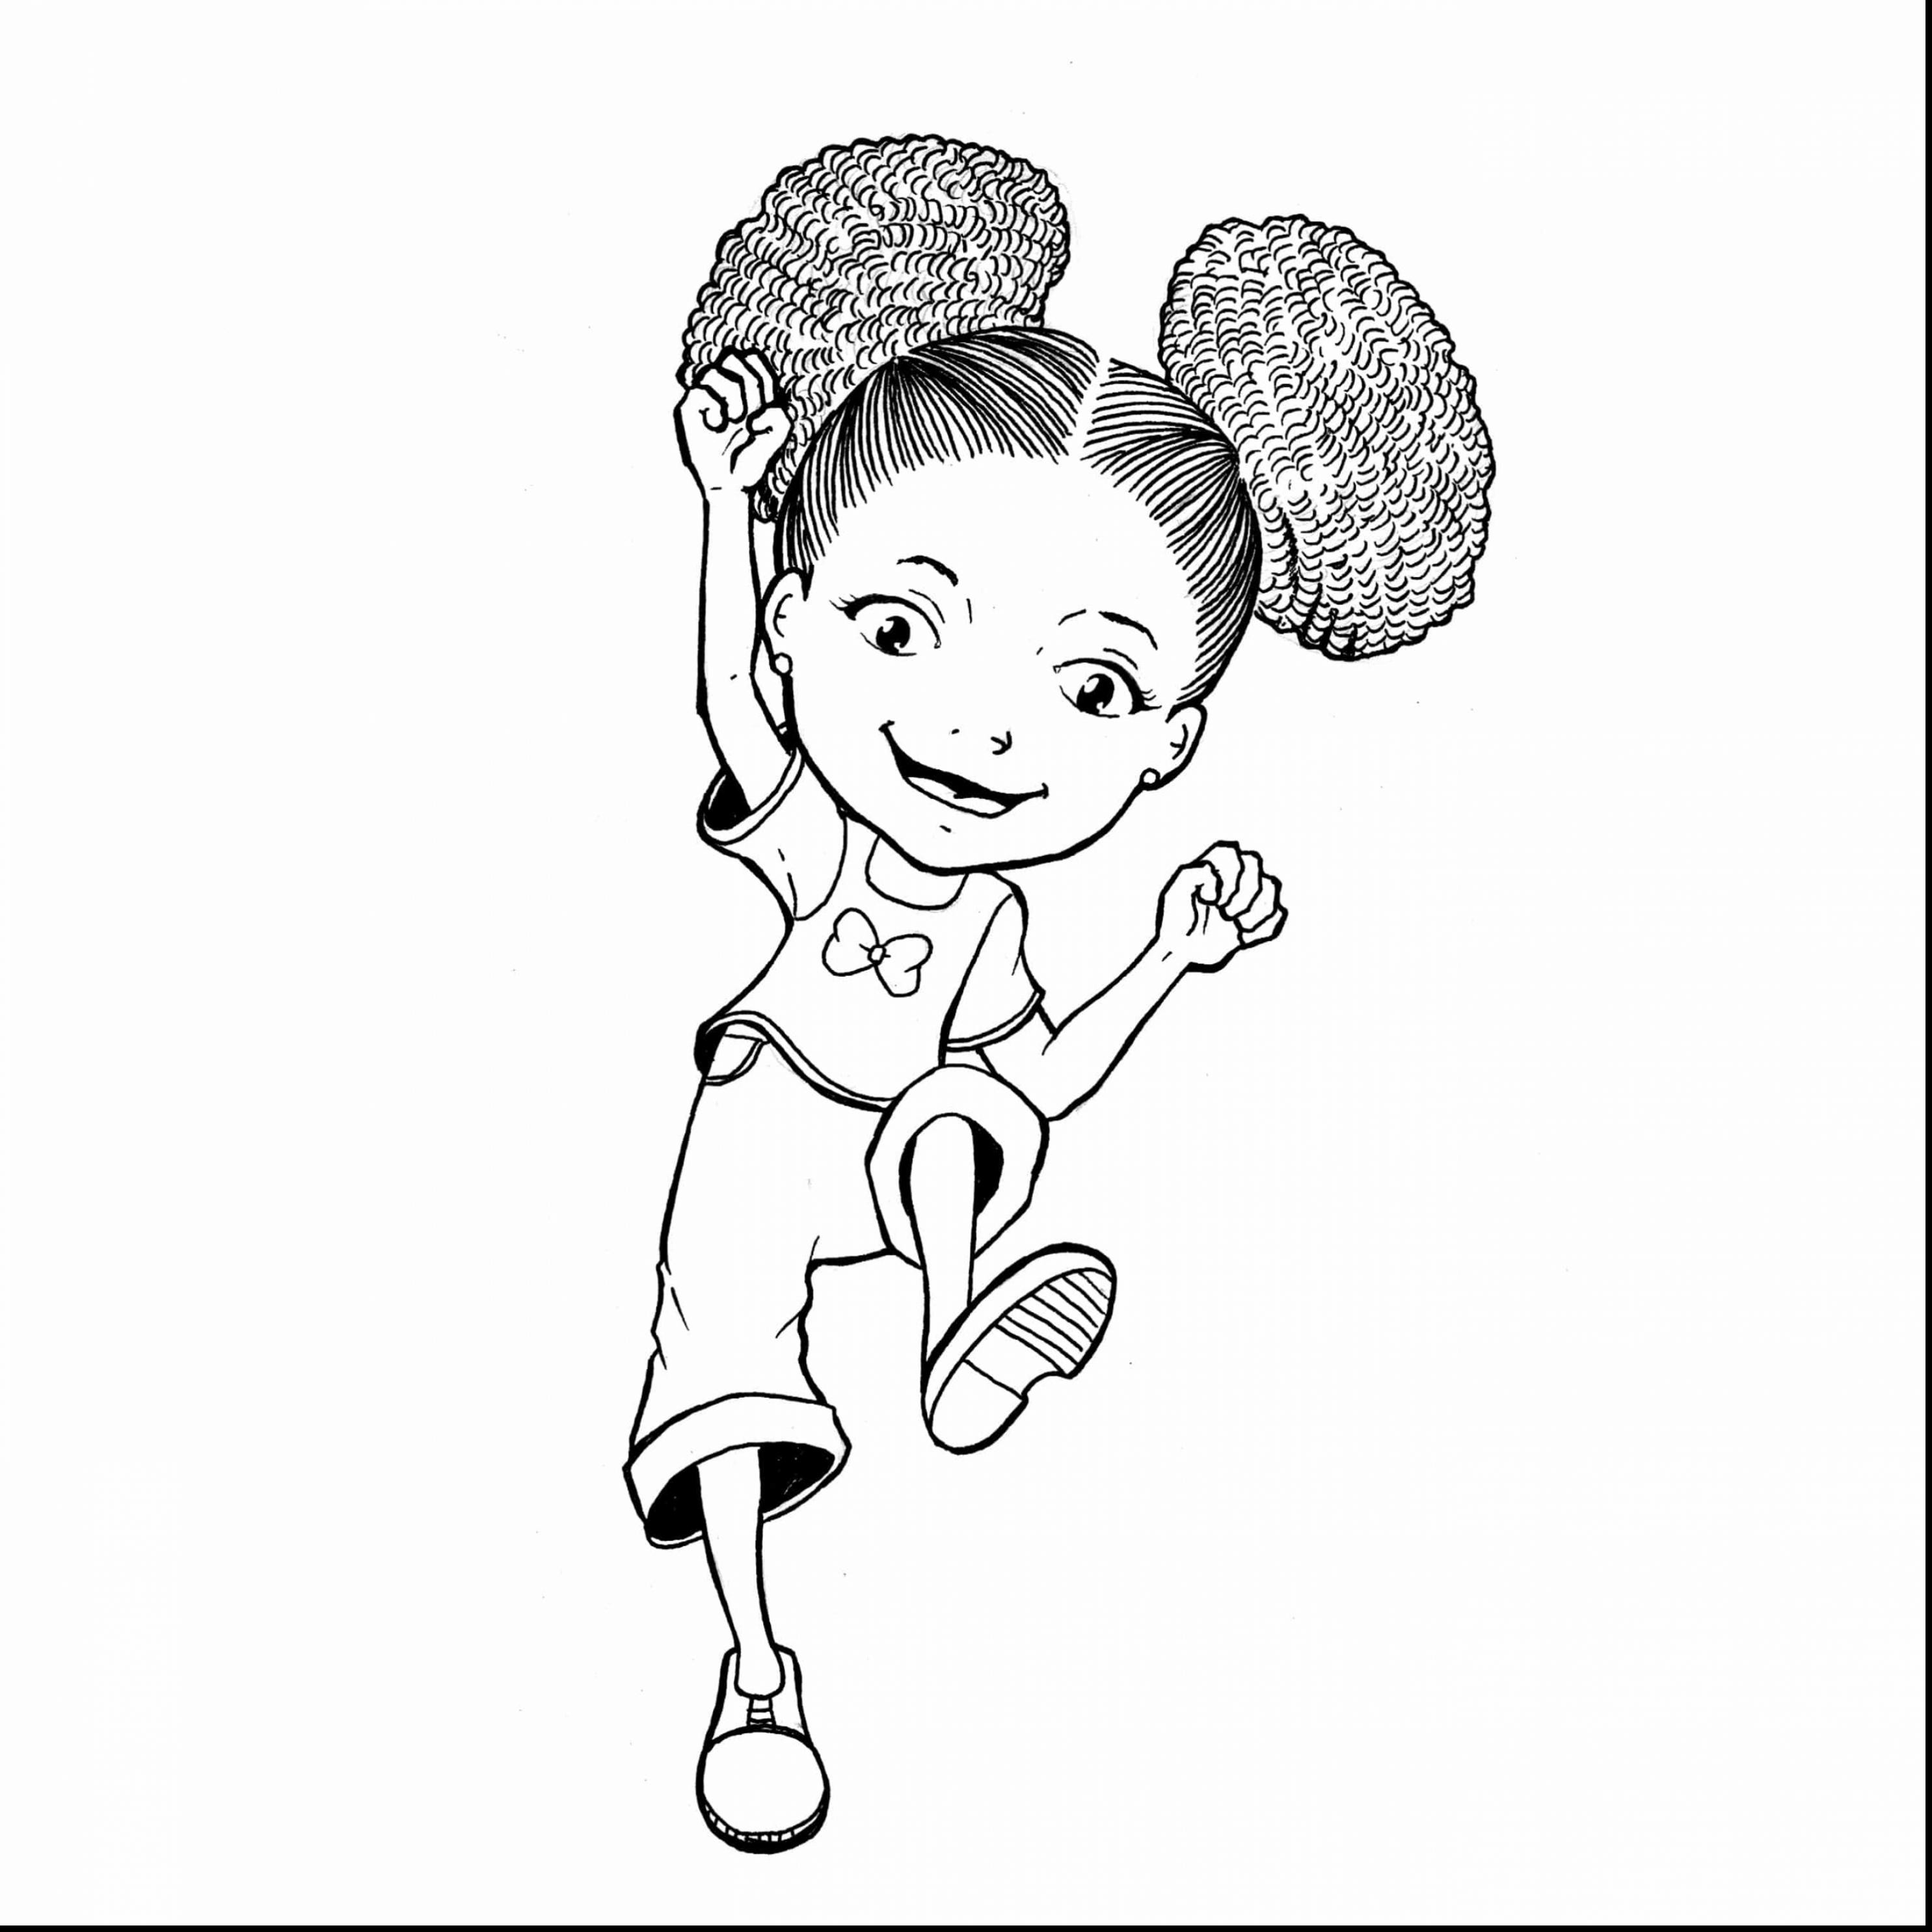 Black Girl Coloring Pages
 Little Black Girl Drawing at GetDrawings